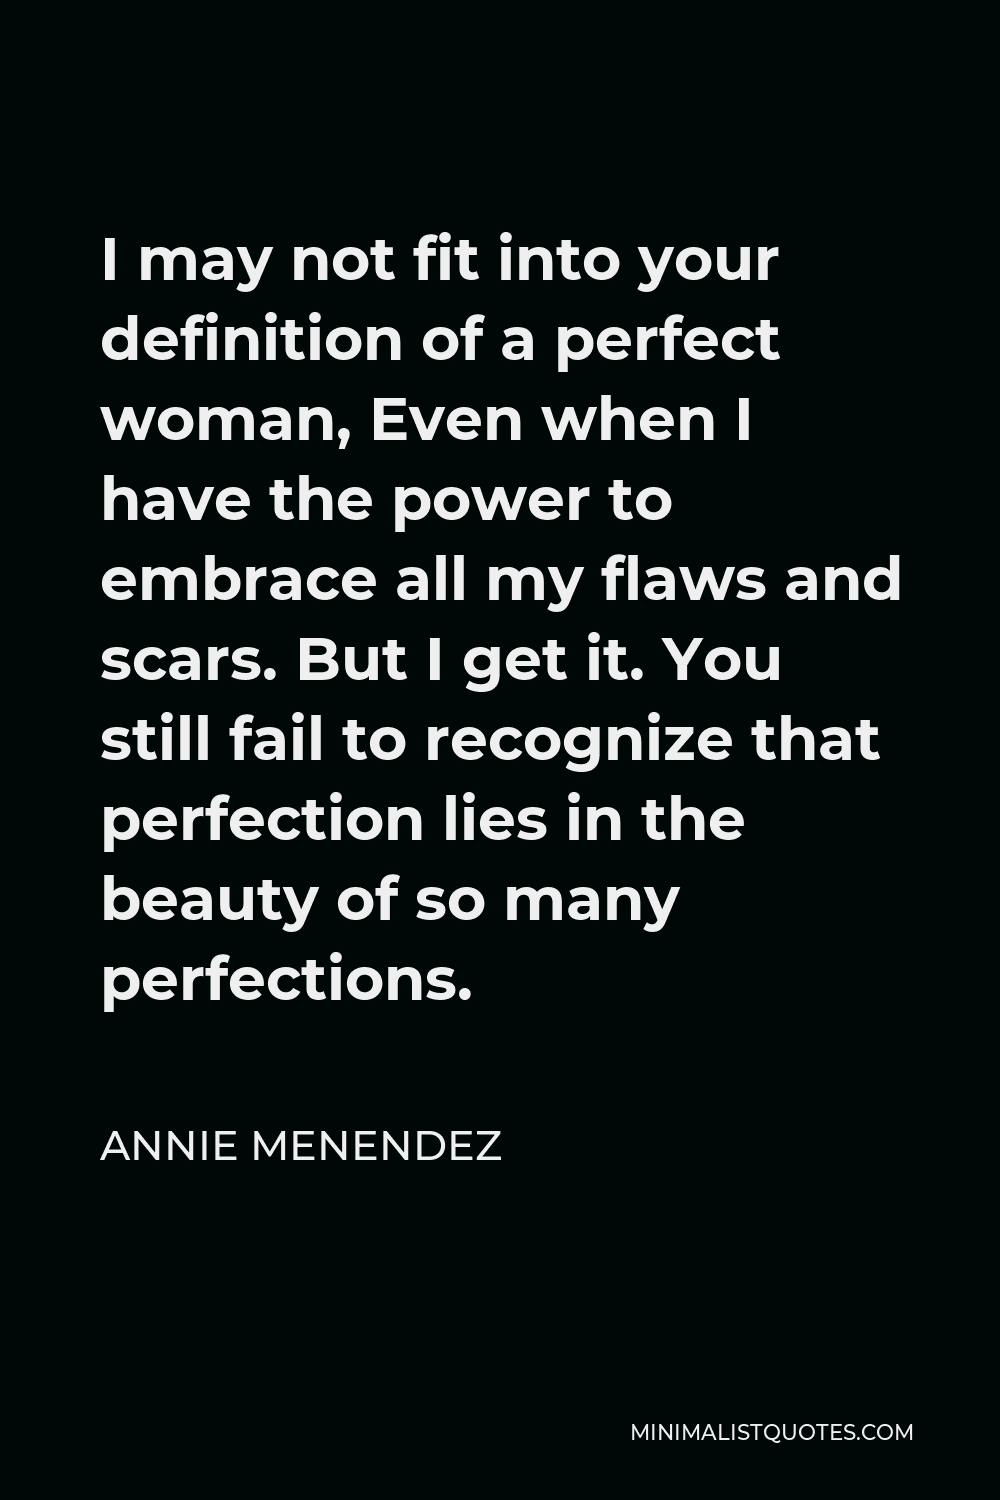 Annie Menendez Quote - I may not fit into your definition of a perfect woman, Even when I have the power to embrace all my flaws and scars. But I get it. You still fail to recognize that perfection lies in the beauty of so many perfections.